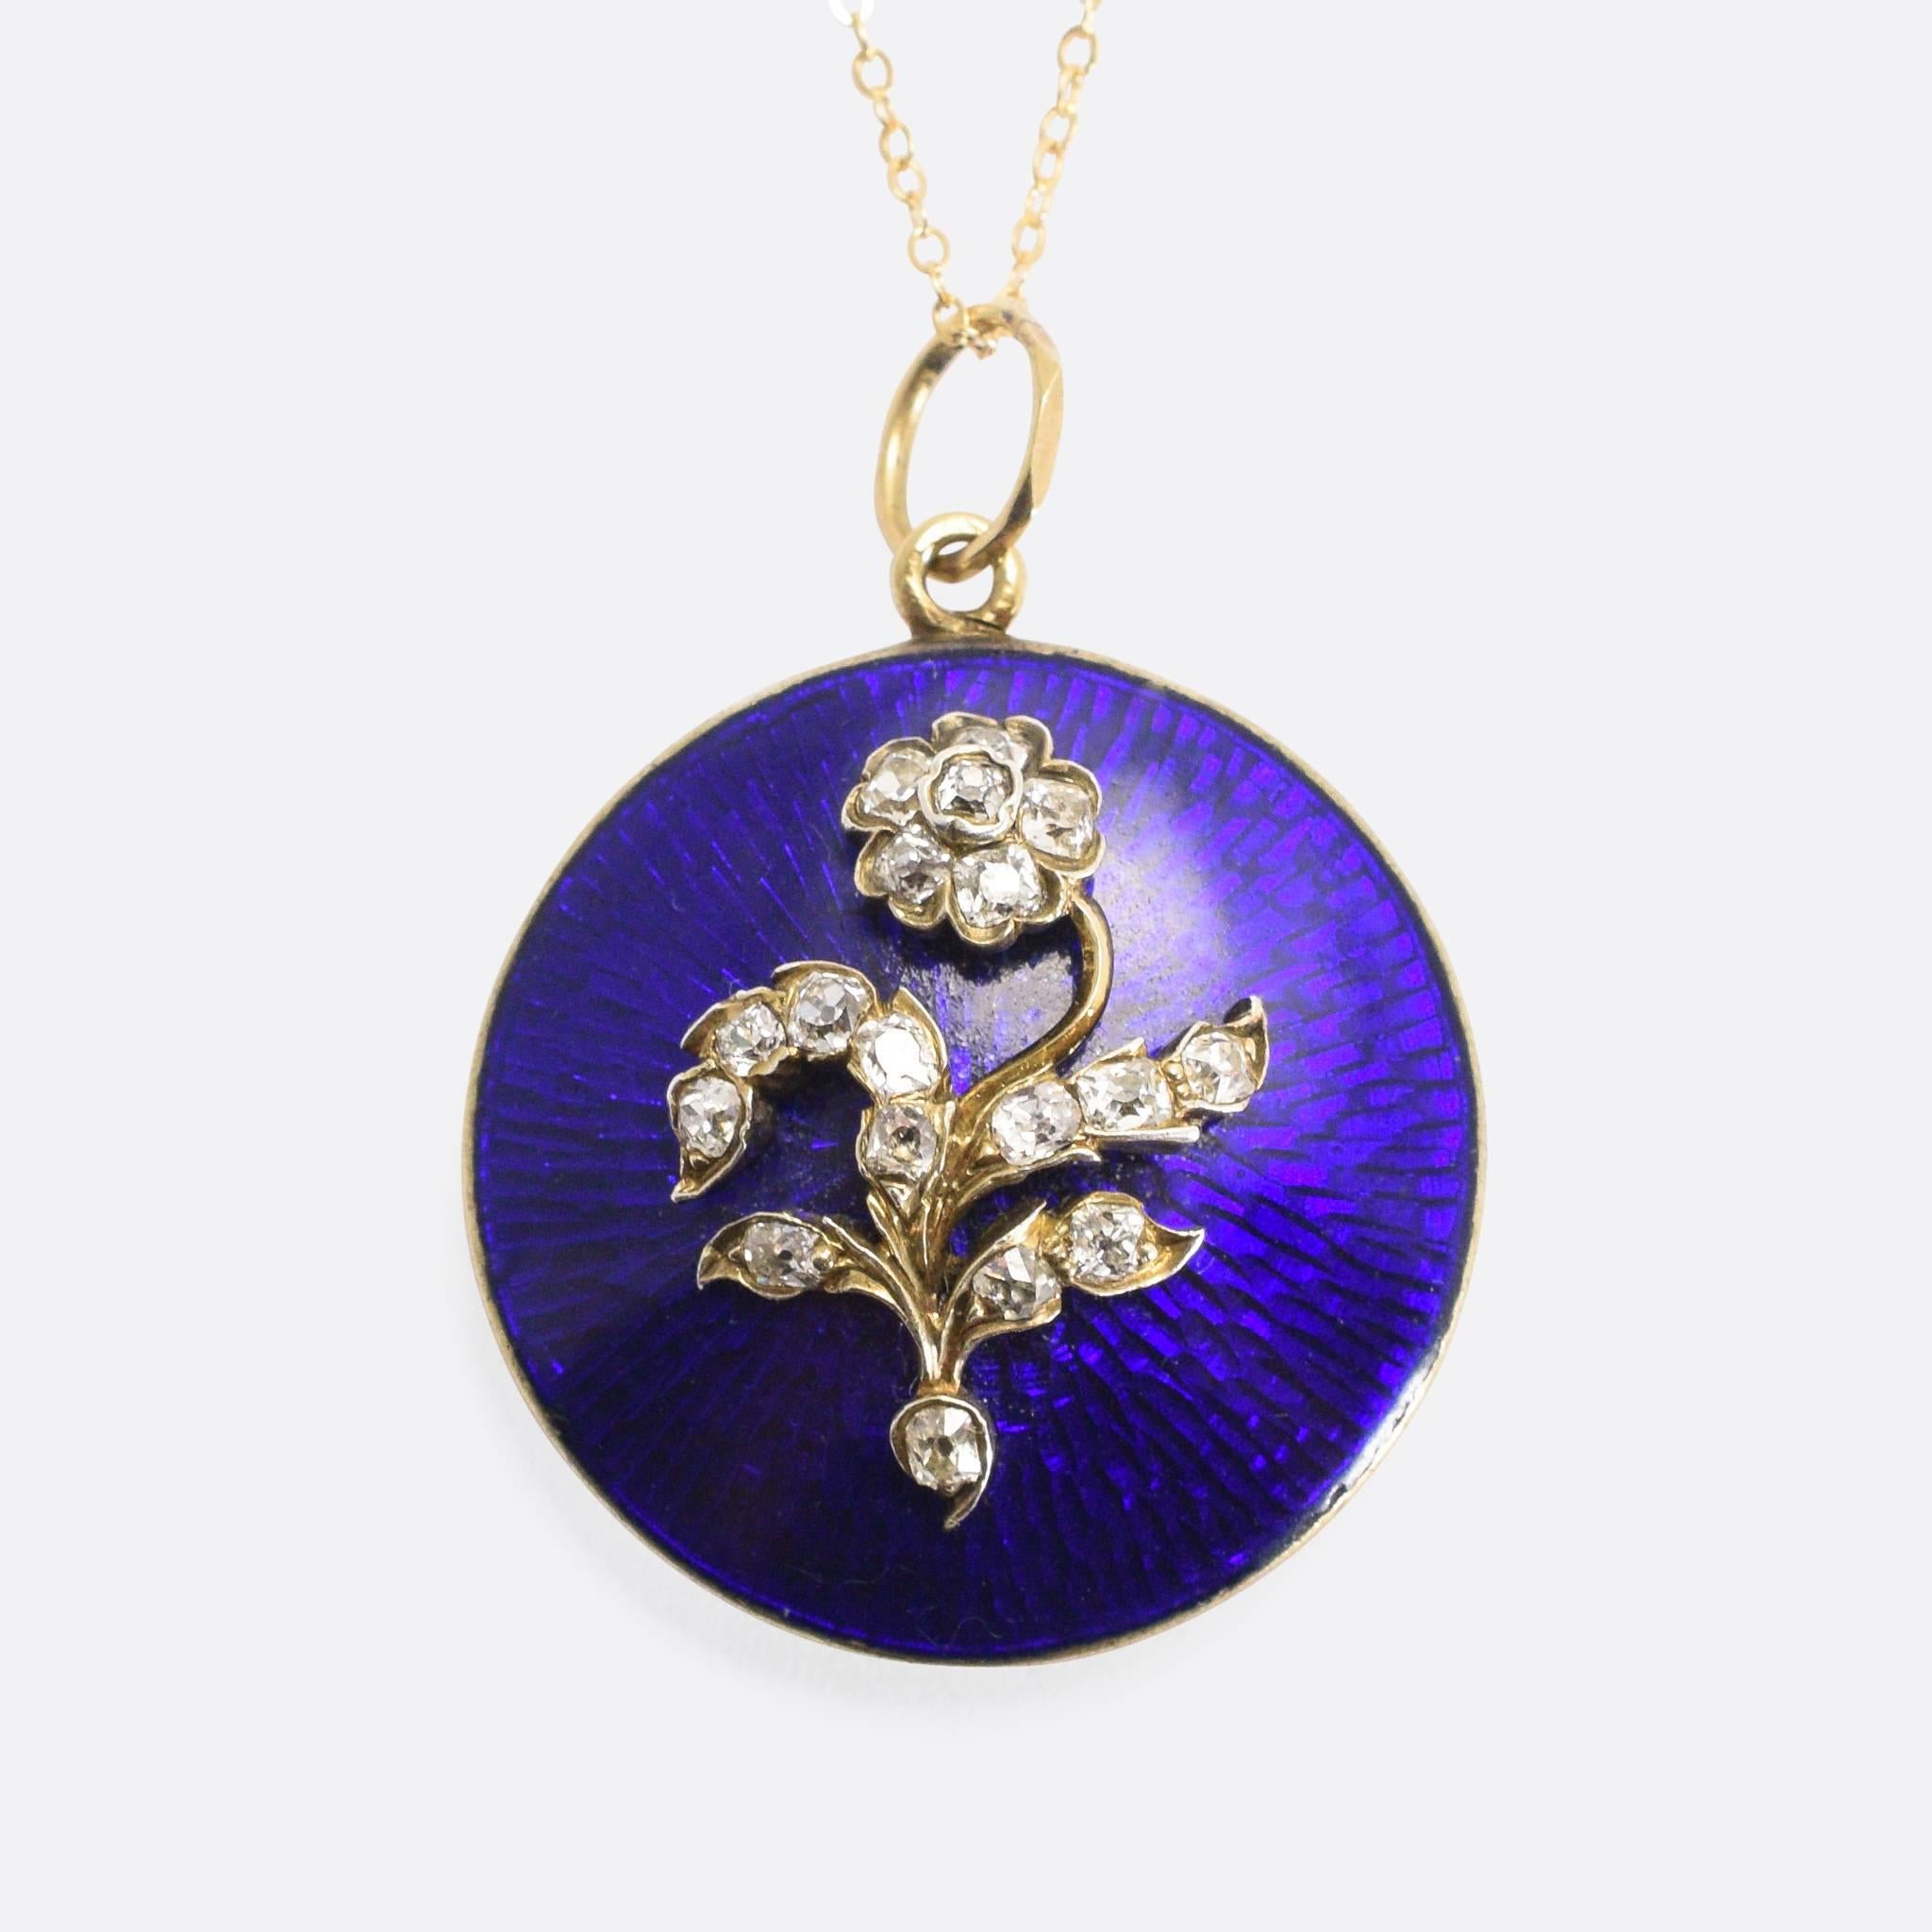 This beautiful round locket dates to the mid-Victorian period, circa 1860. The front features a diamond-set Forget-Me-Not flower on a sea of blue guilloché enamel. A glass-fronted locket compartment can be found on the back, with space for a